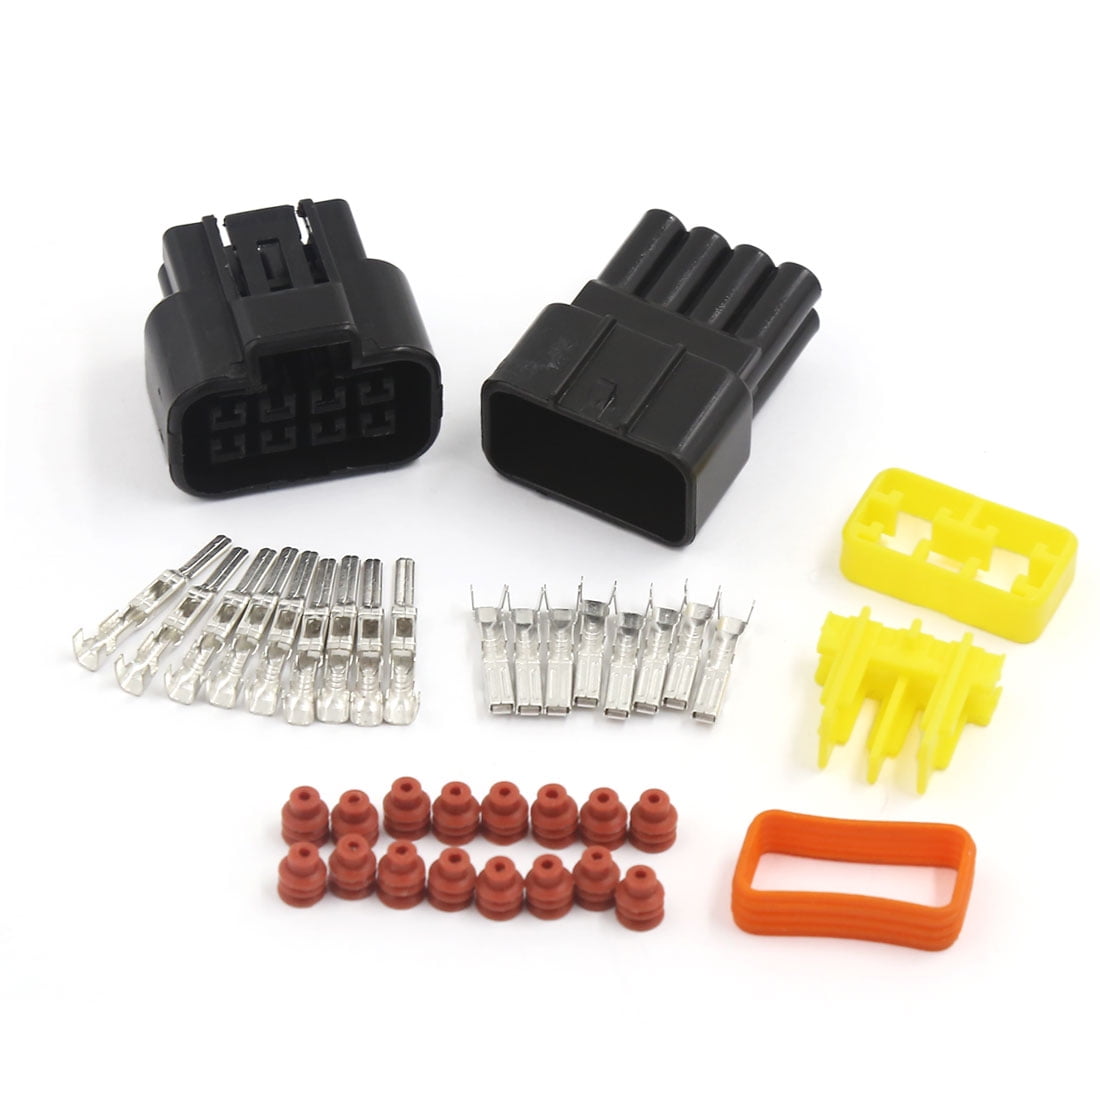 10 Kit 4 Pin Way Sealed Waterproof Electrical Wire Connector Plug Car Auto Set 